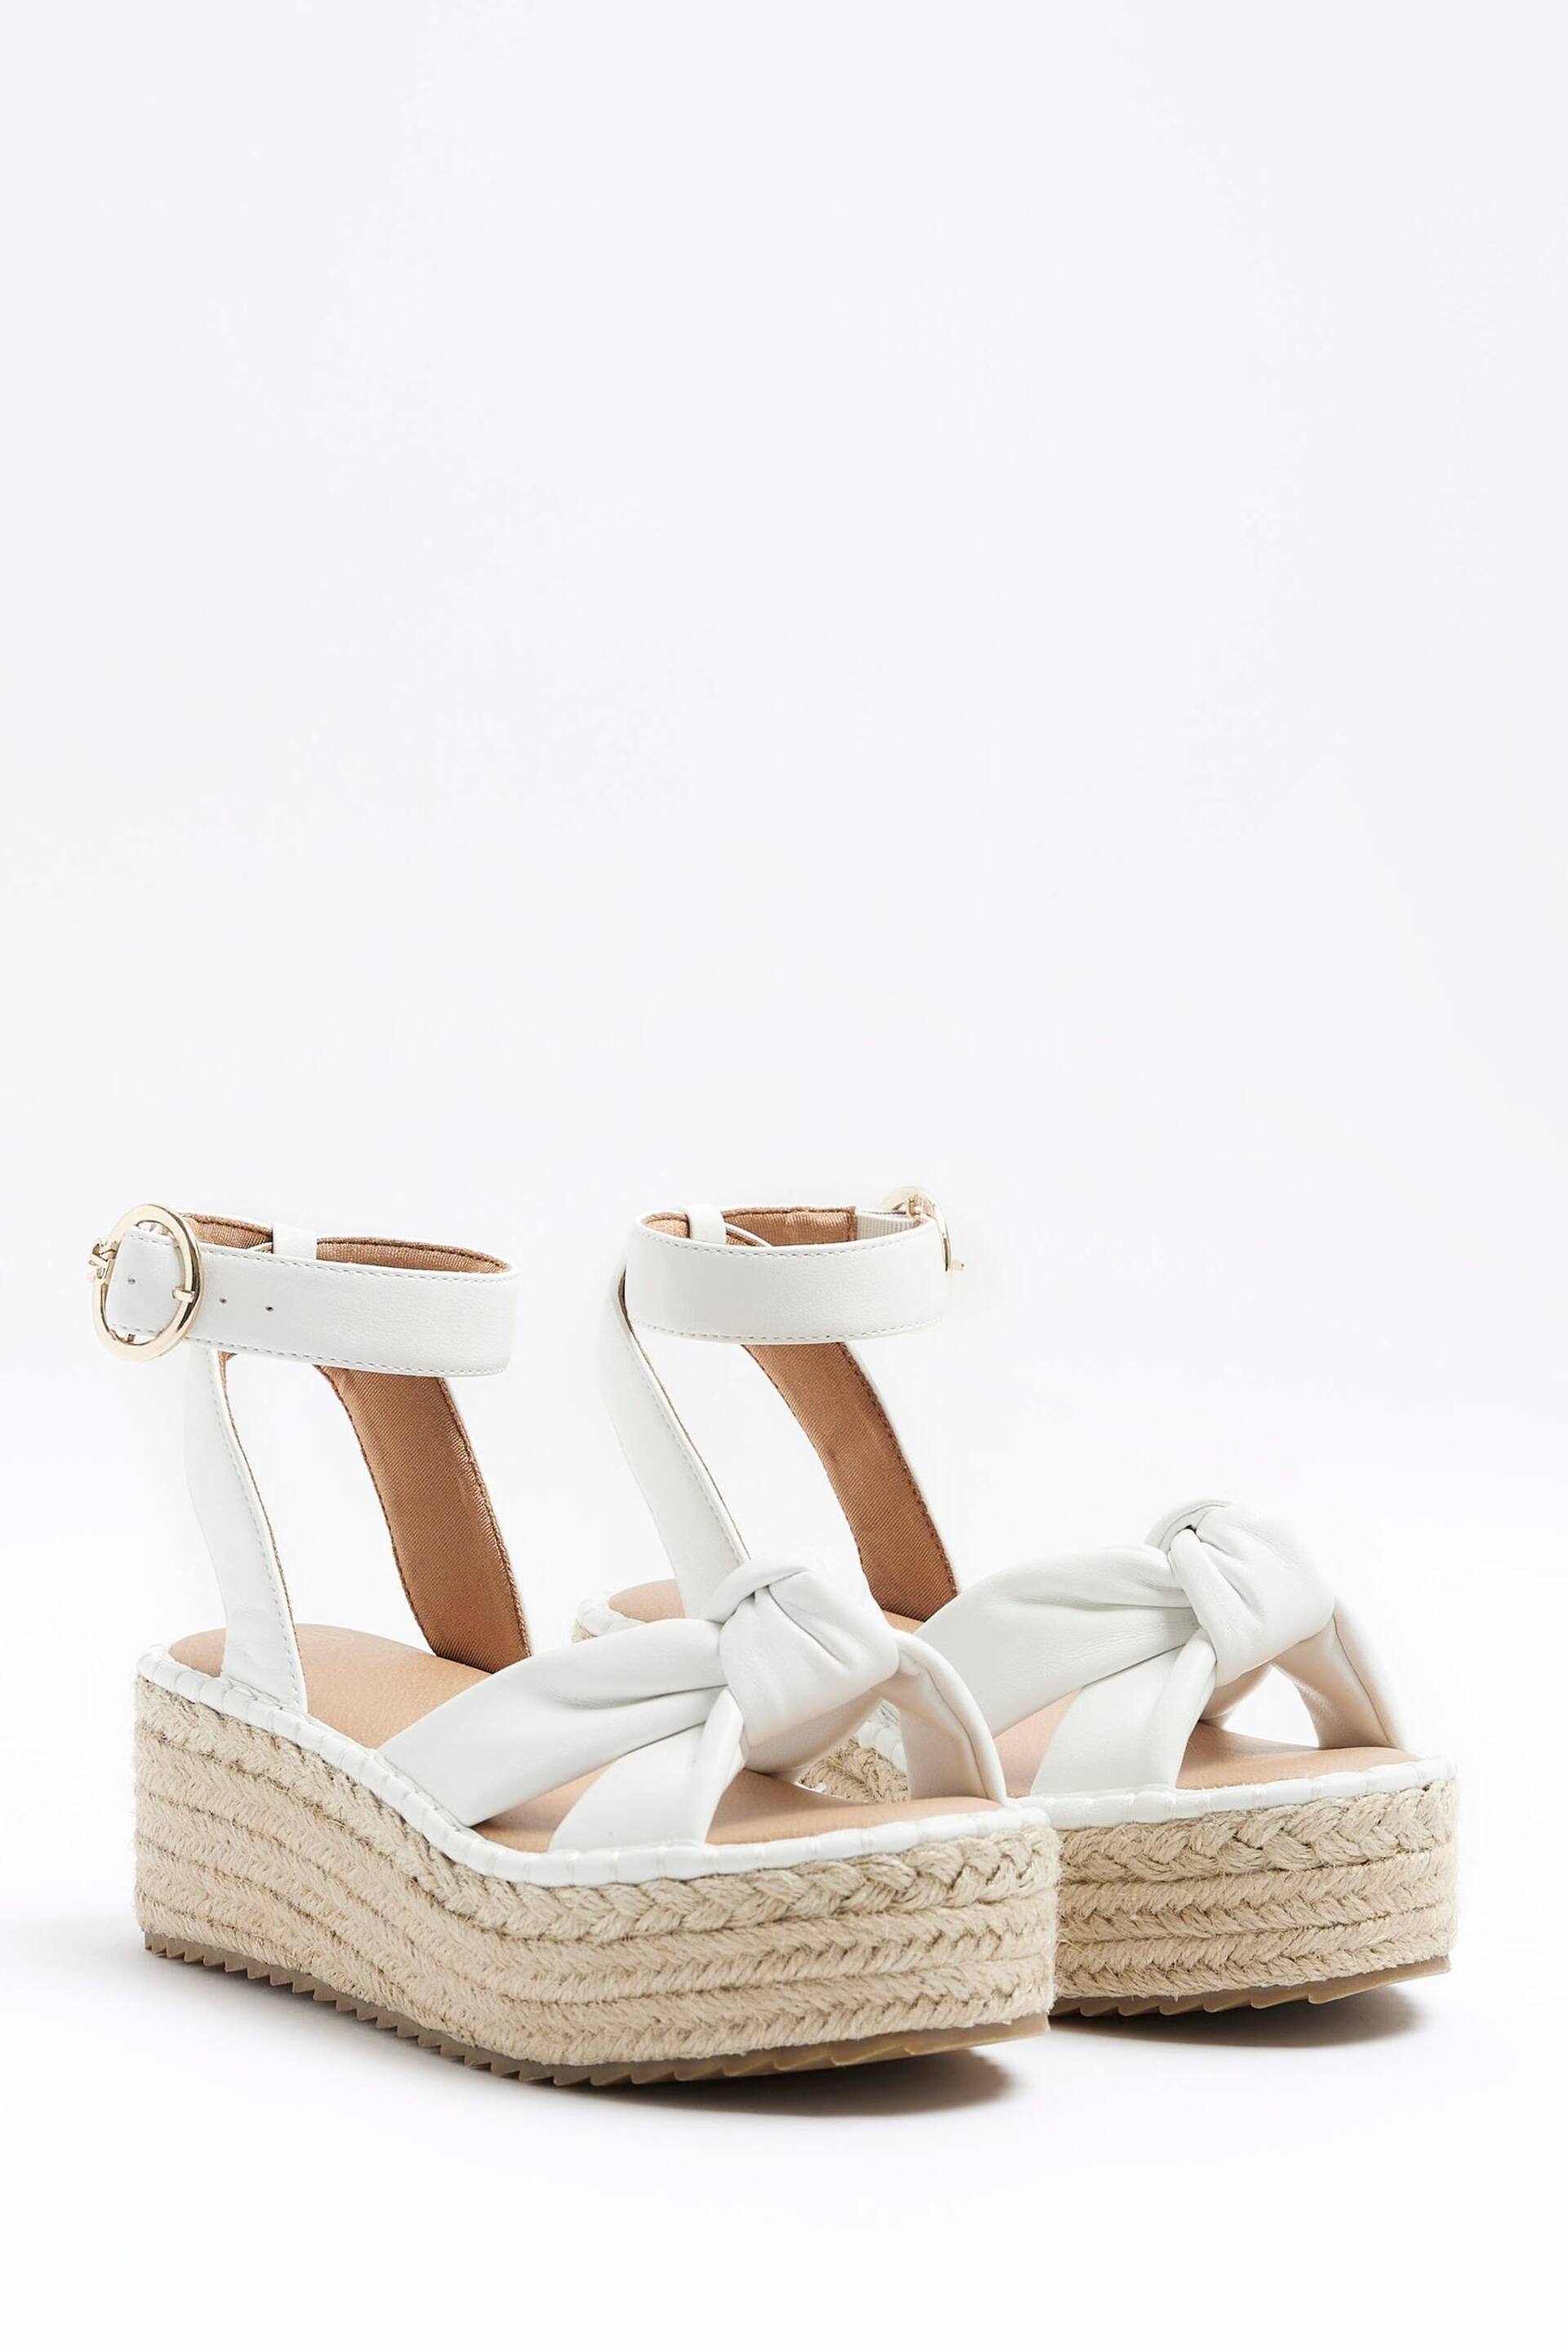 River Island White Espadrille Sandals - Image 2 of 5